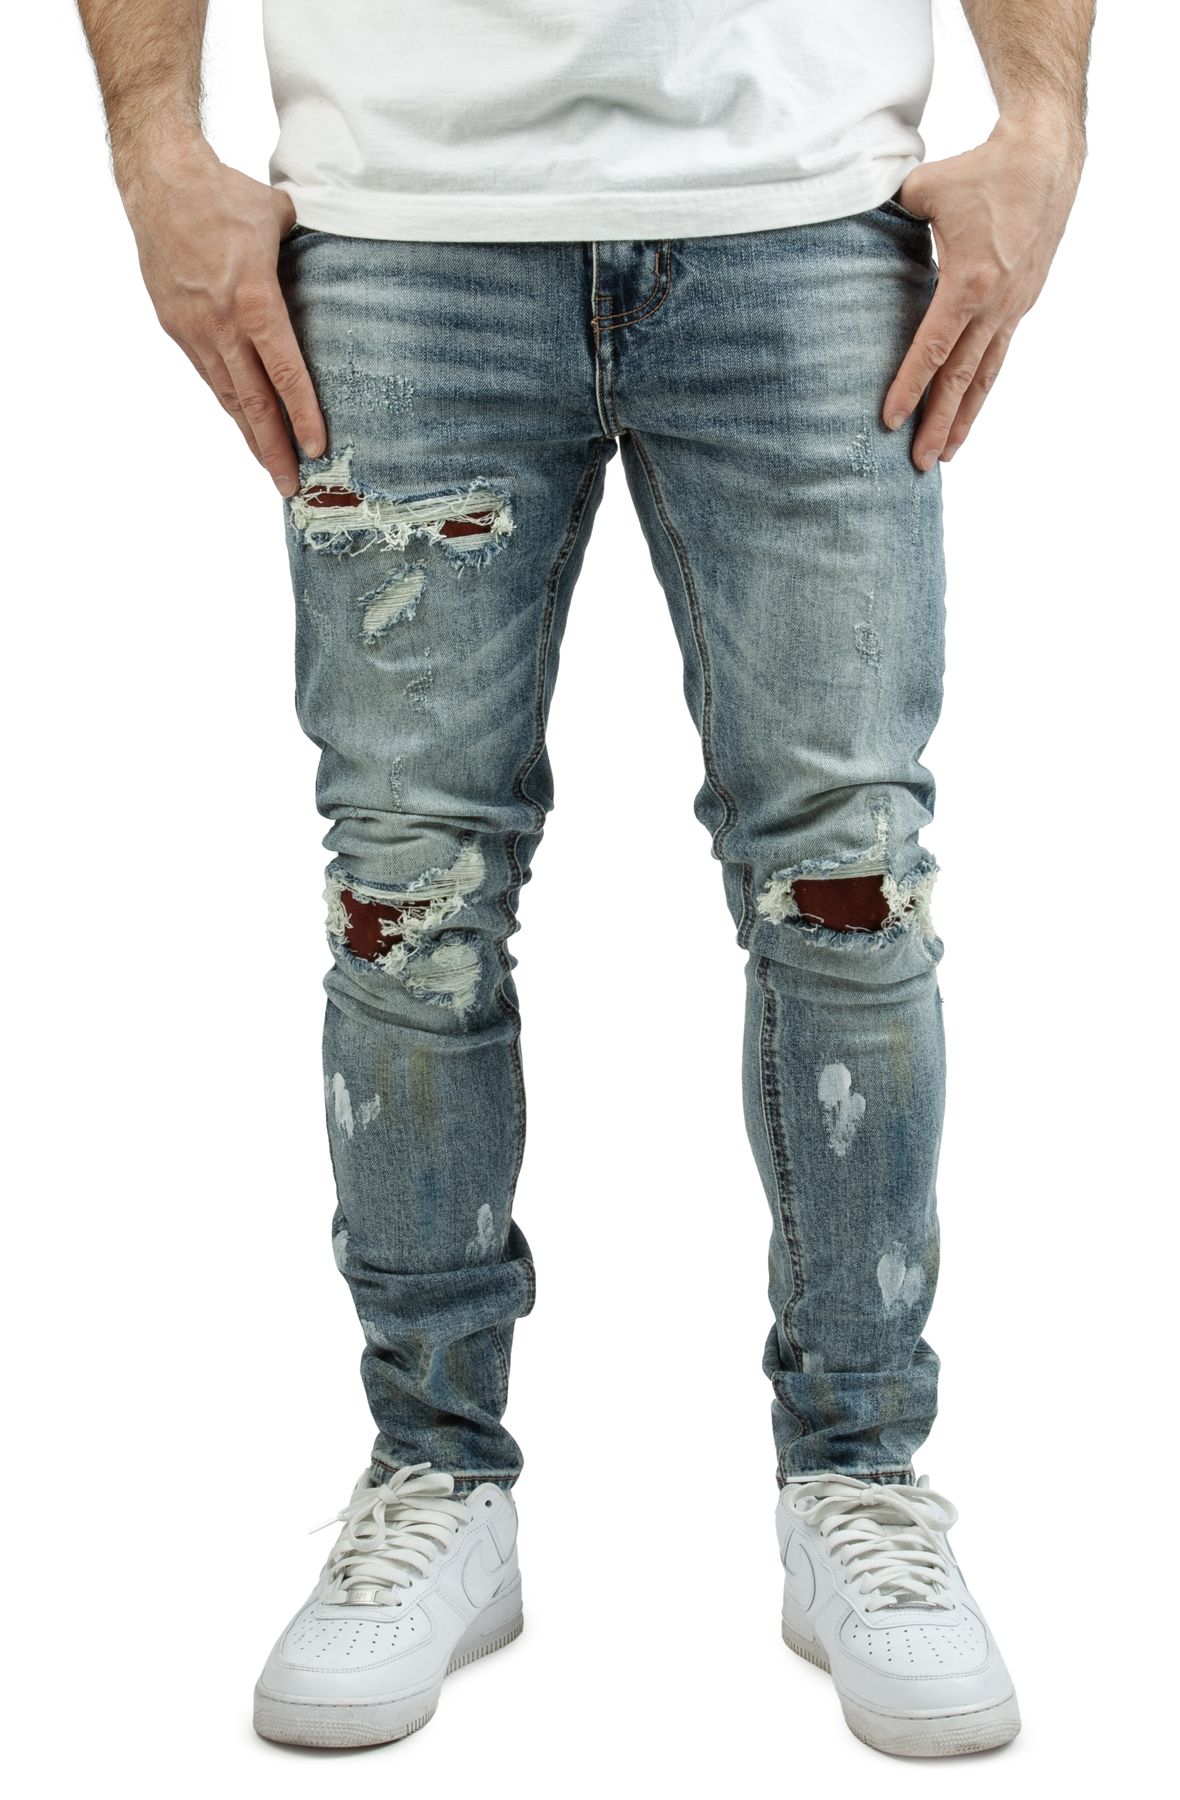 FOREIGN LOCALS Louie Suede Backing Jeans FL-24004 - Shiekh